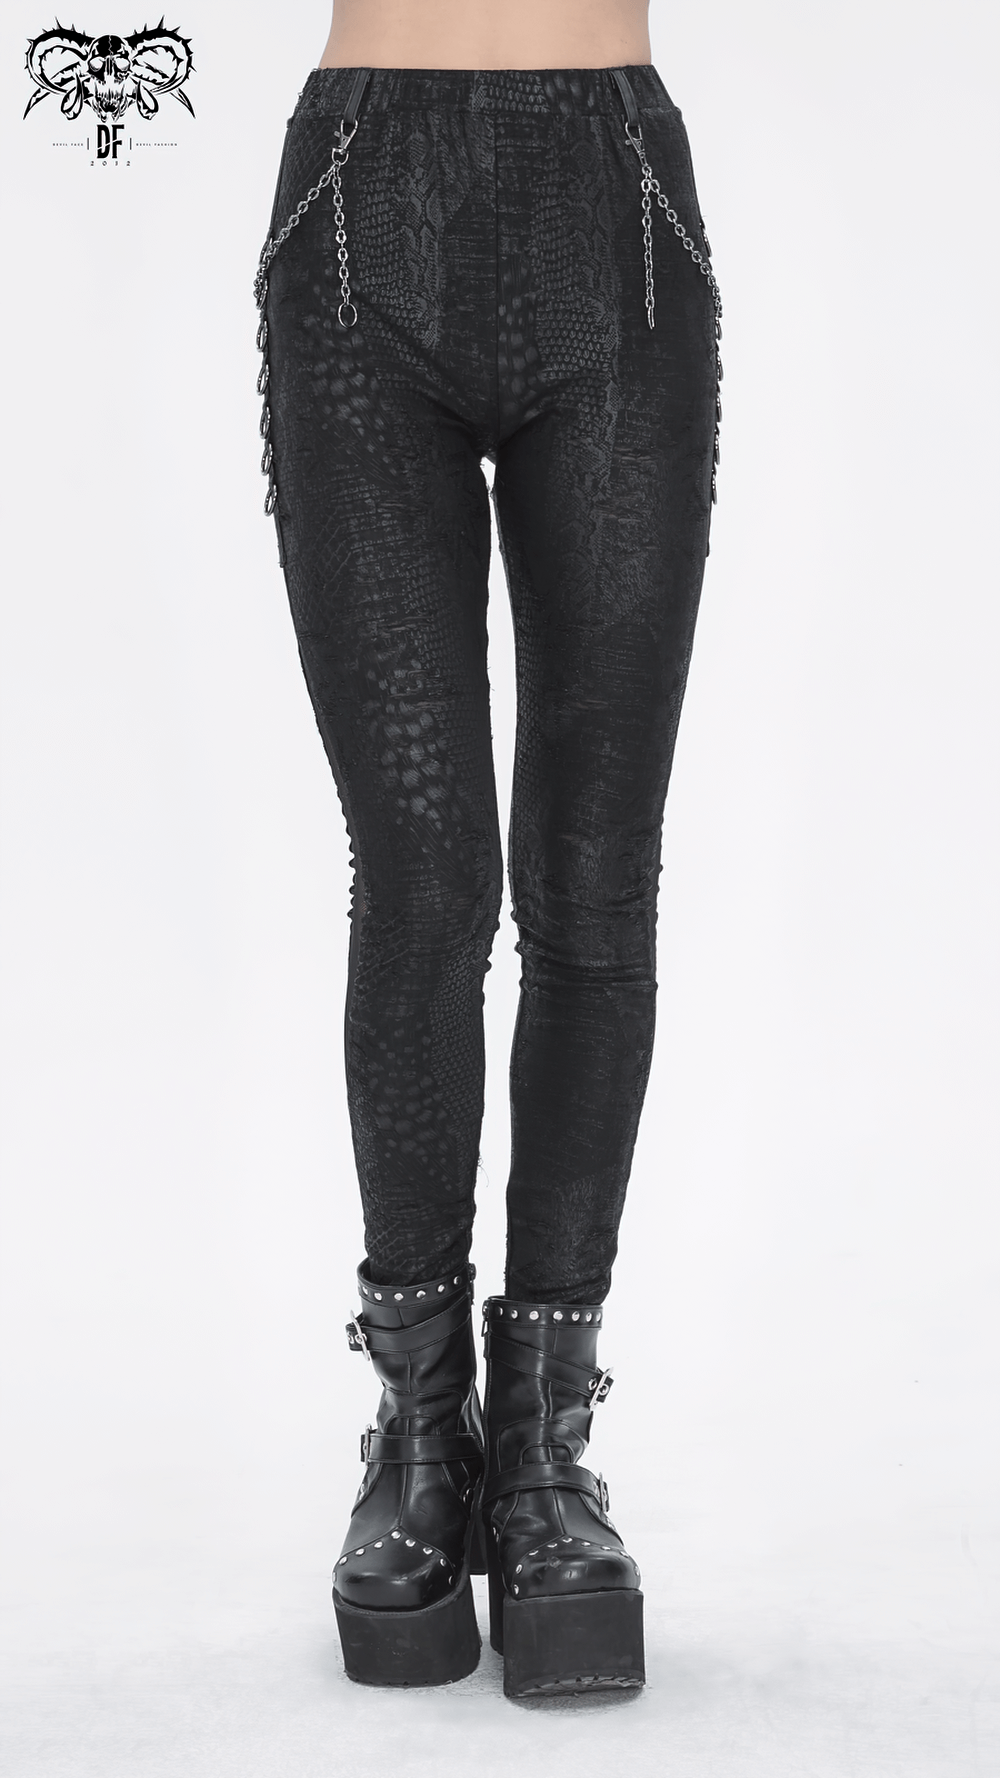 Chic Reptile Print Skinny Leggings with Chain for Women